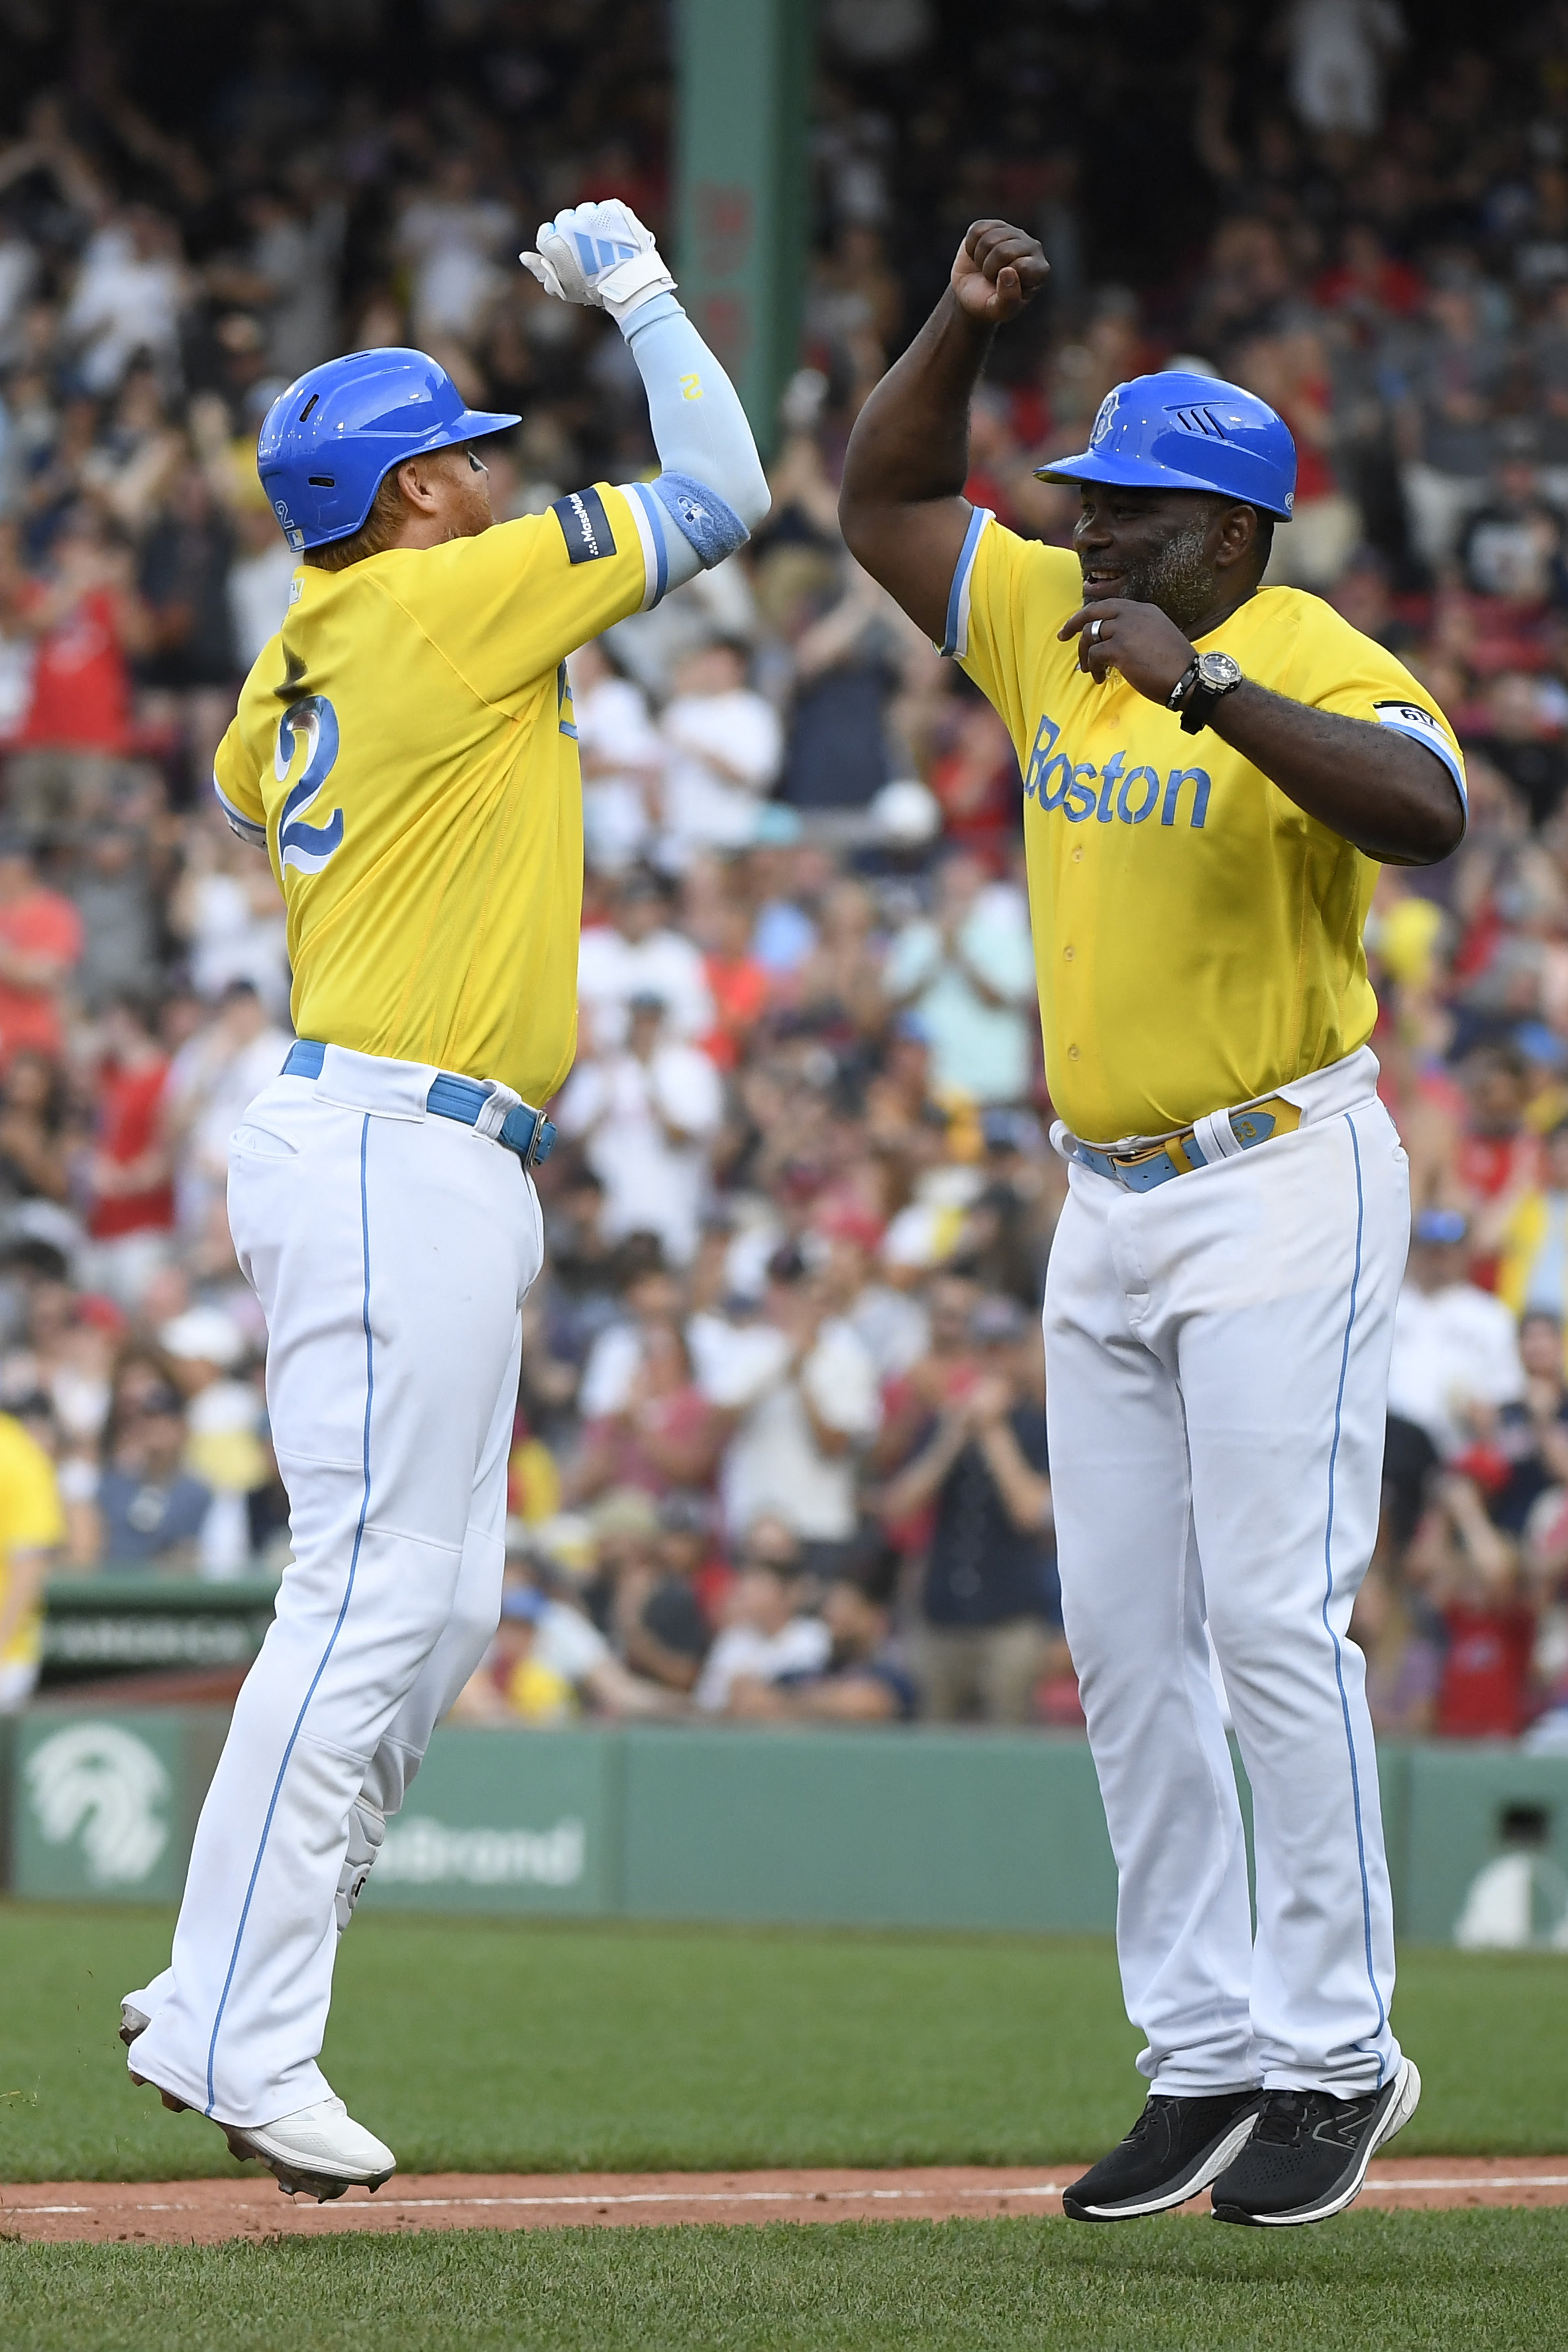 Why did the Boston Red Sox Wear Yellow and Blue Jerseys?